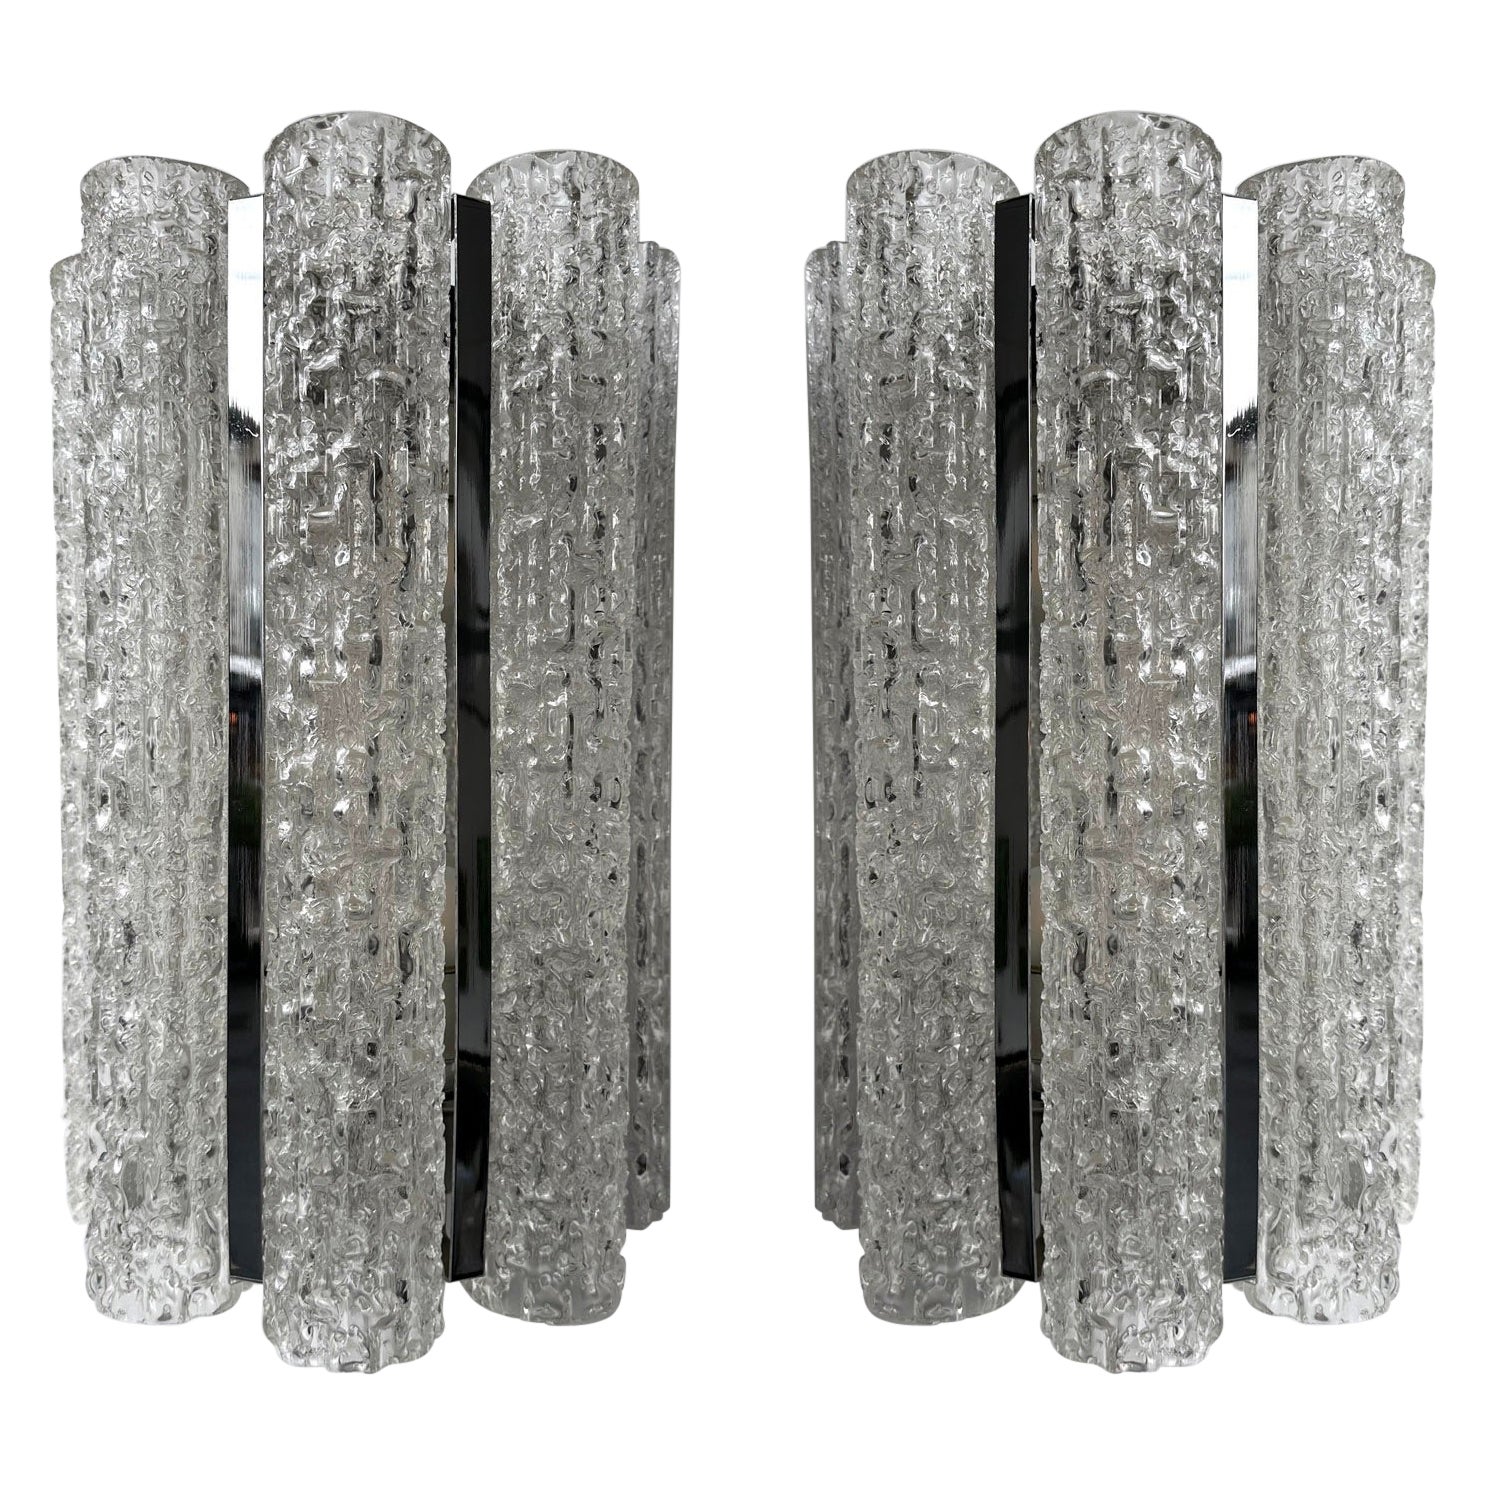 Pair of Glass Tube and Metal Chrome Sconces by Doria Leuchten. Germany, 1970s